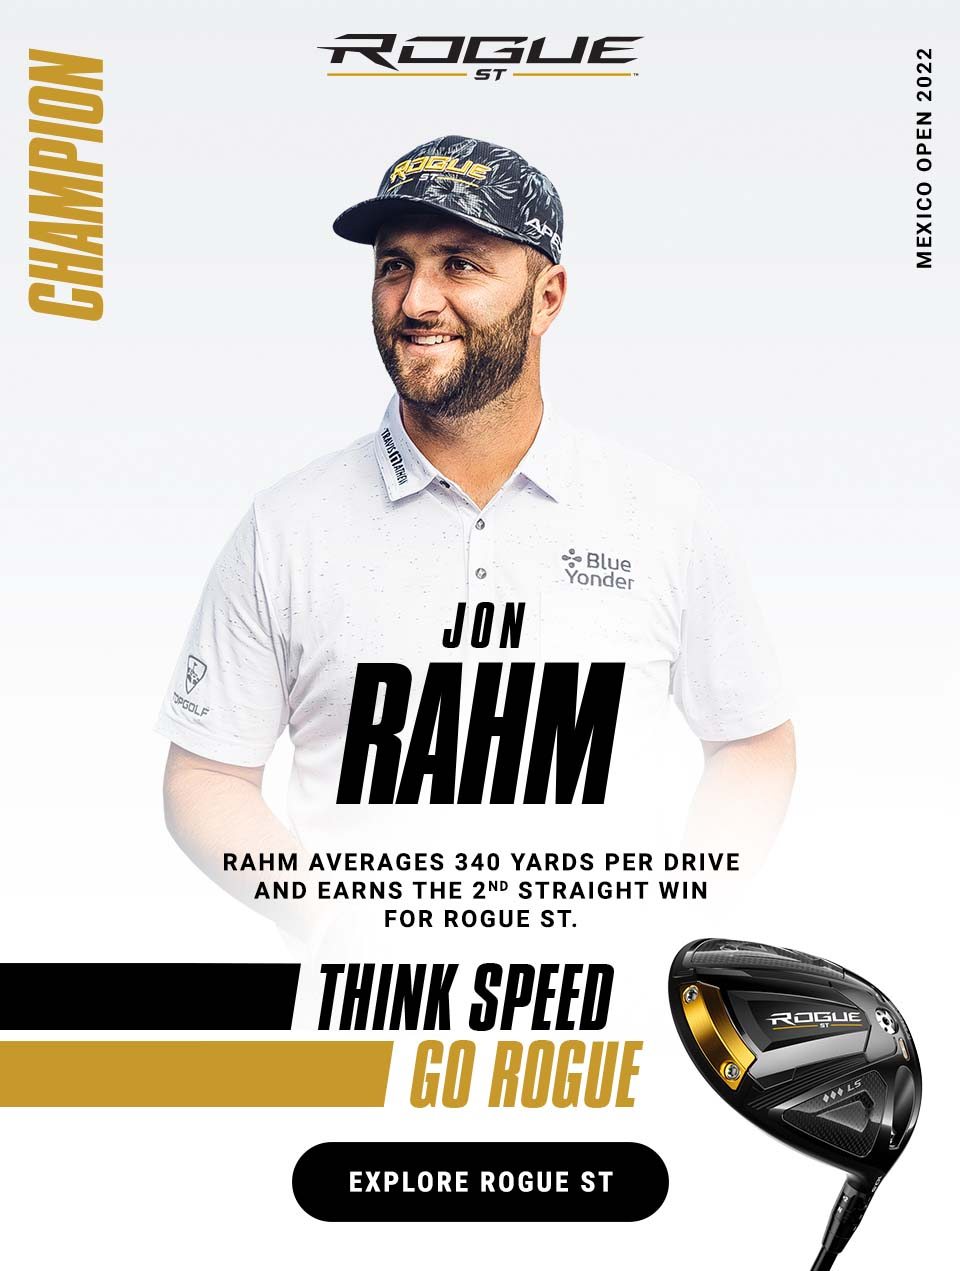 Jon Rahm - Rahm averages 340 yards per drive and earns the 2nd straight win for Rogue ST. Explore Rogue ST.